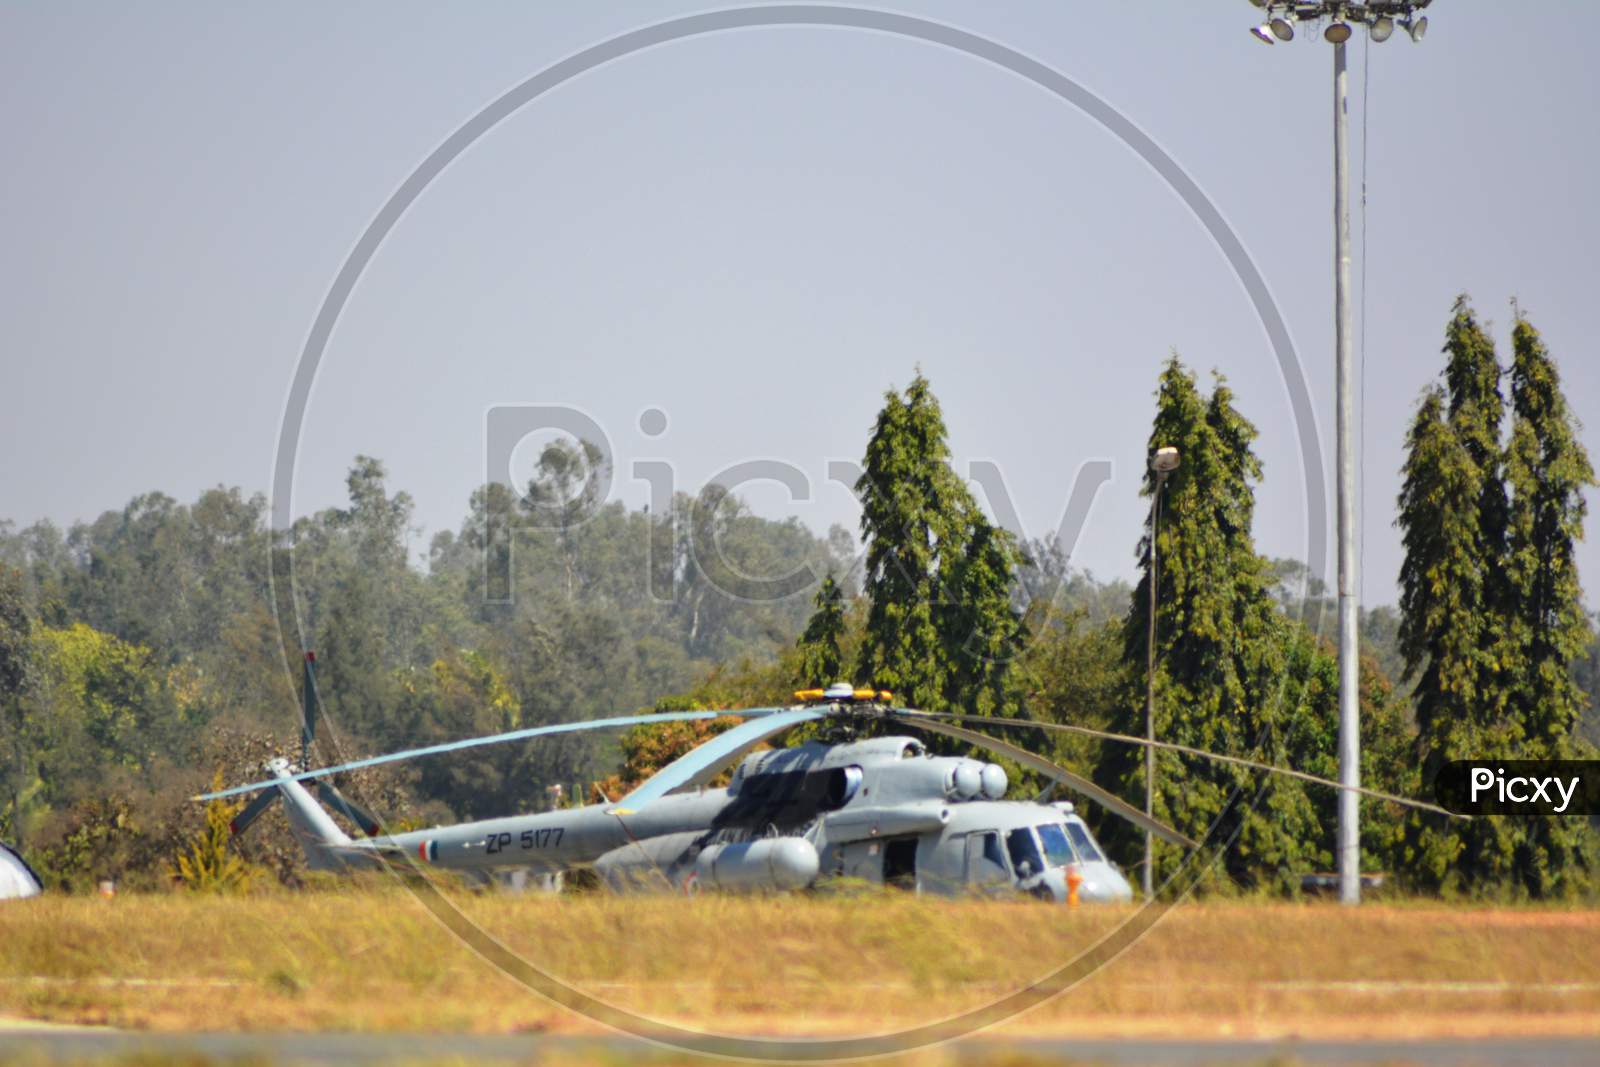 Indian Air Force Mi-17 v5,  a military transport variant helicopter